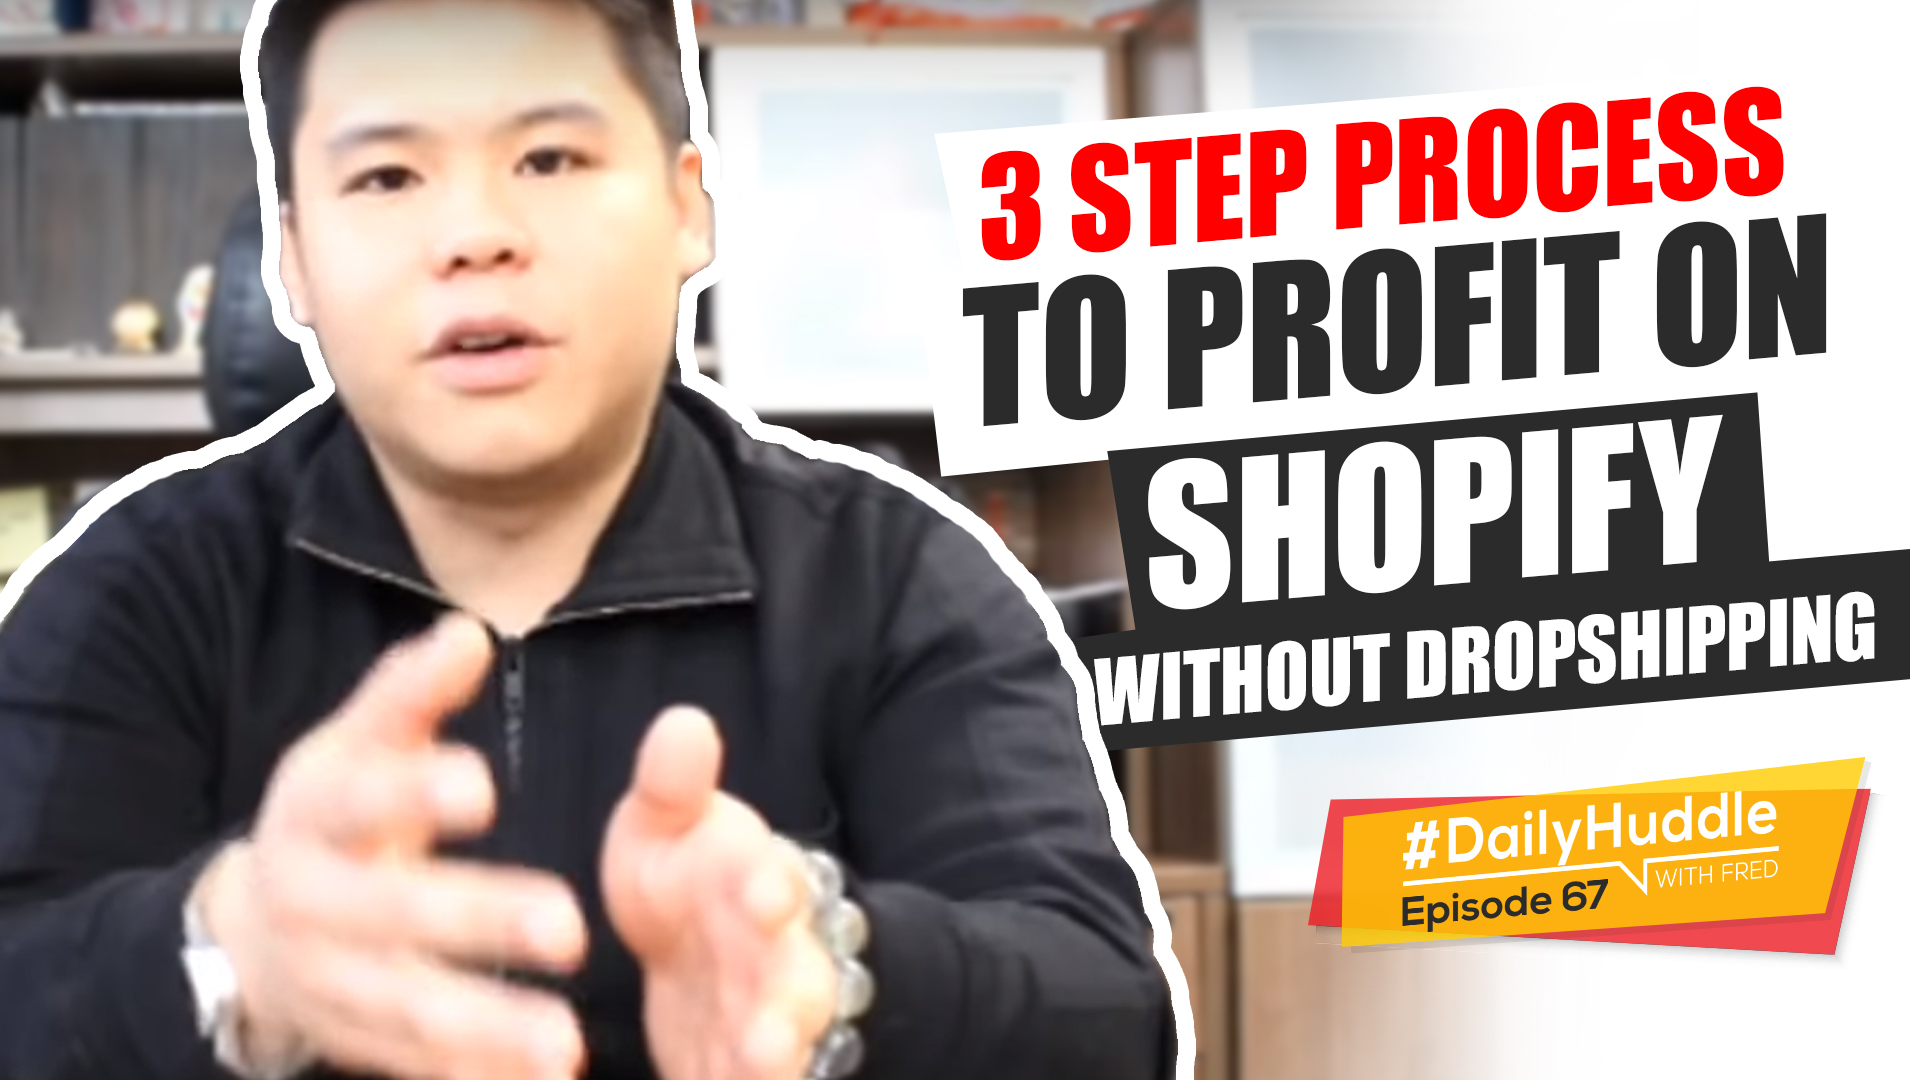 Daily Huddle - Ep 67 | 3 Step Process To PROFIT On Shopify WITHOUT Dropshipping